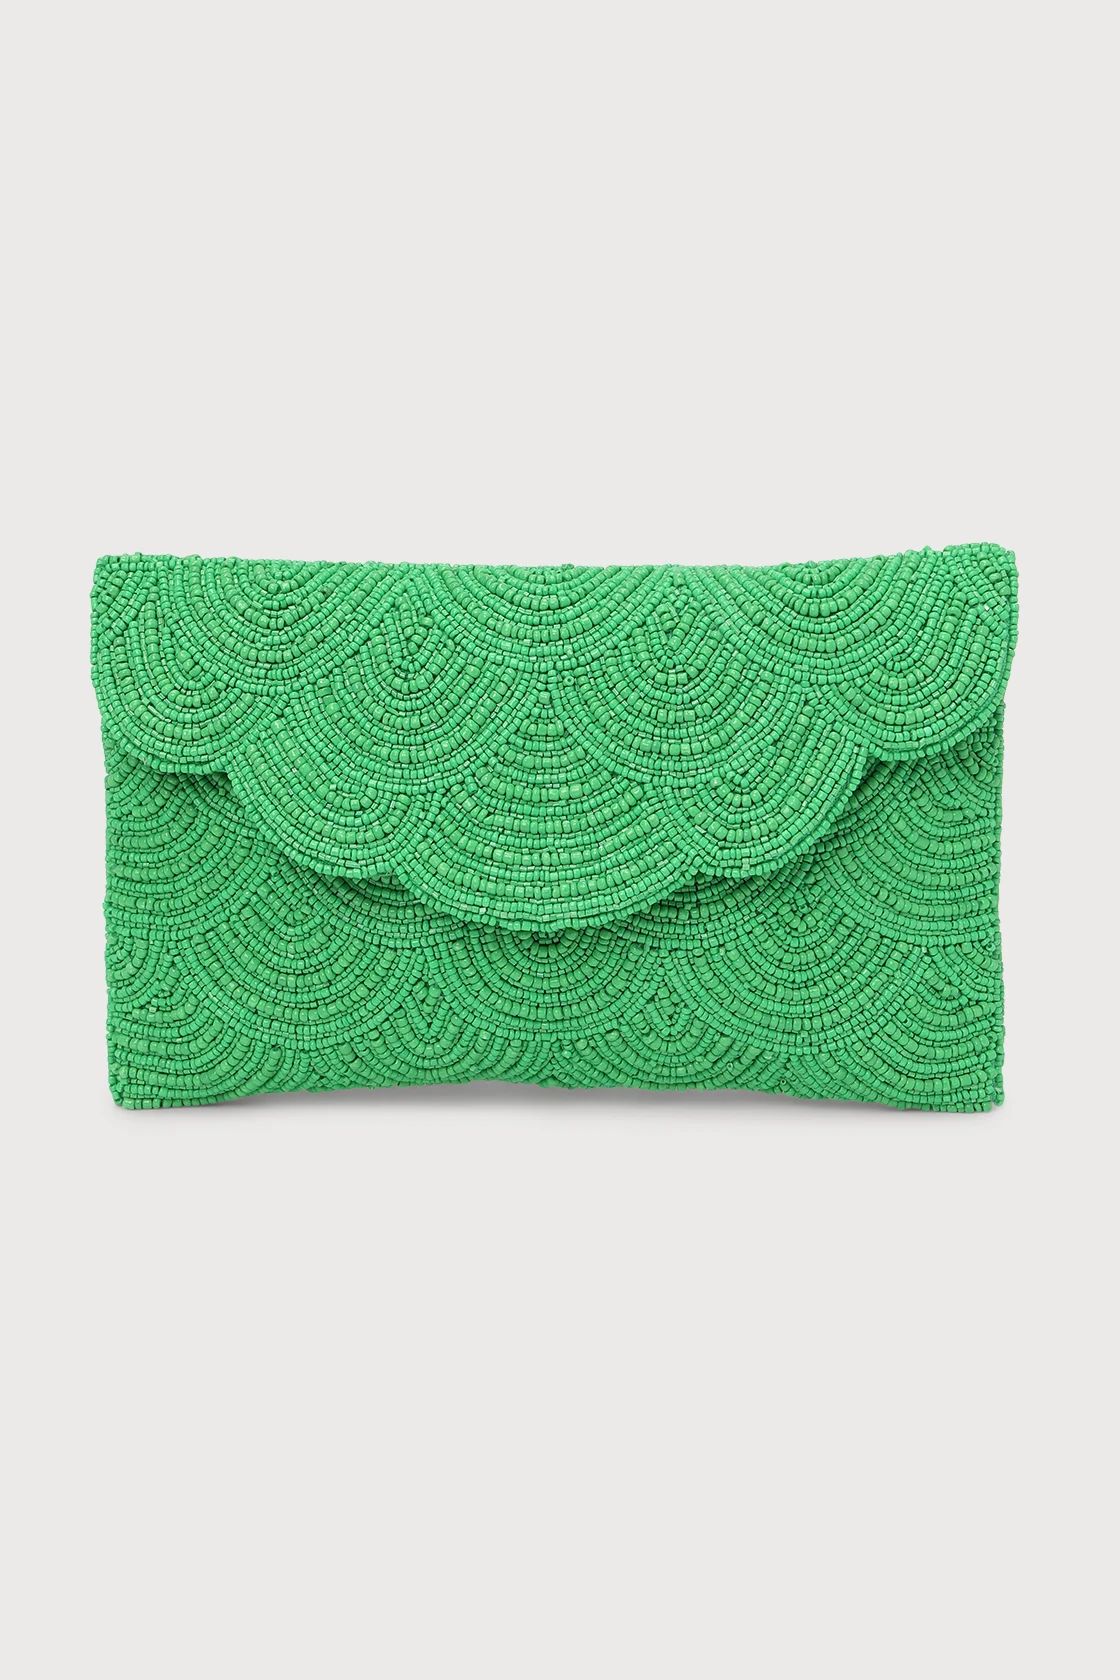 Deco Designs Green Beaded Scalloped Clutch | Lulus